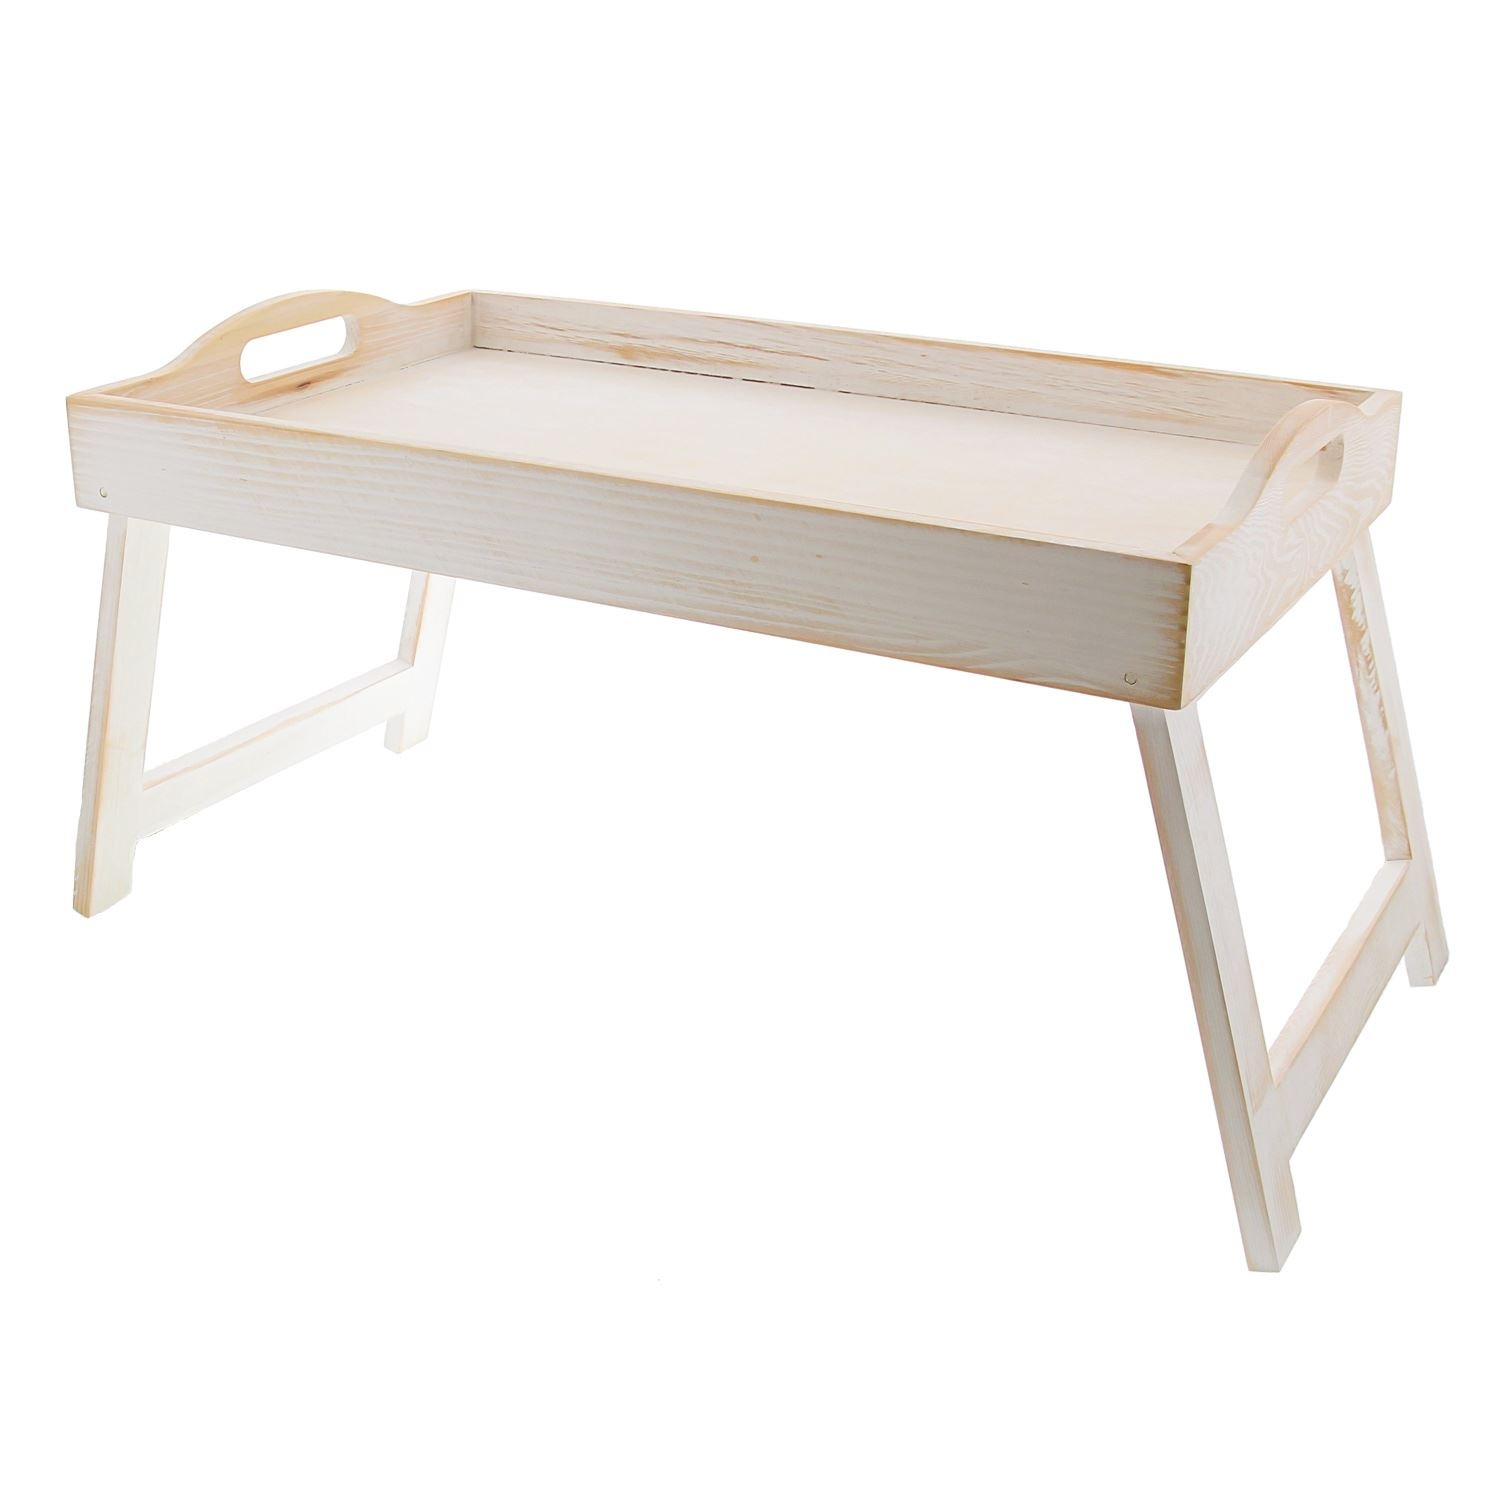 Wooden tray foldable white - 620*275*300mm - 1 piece